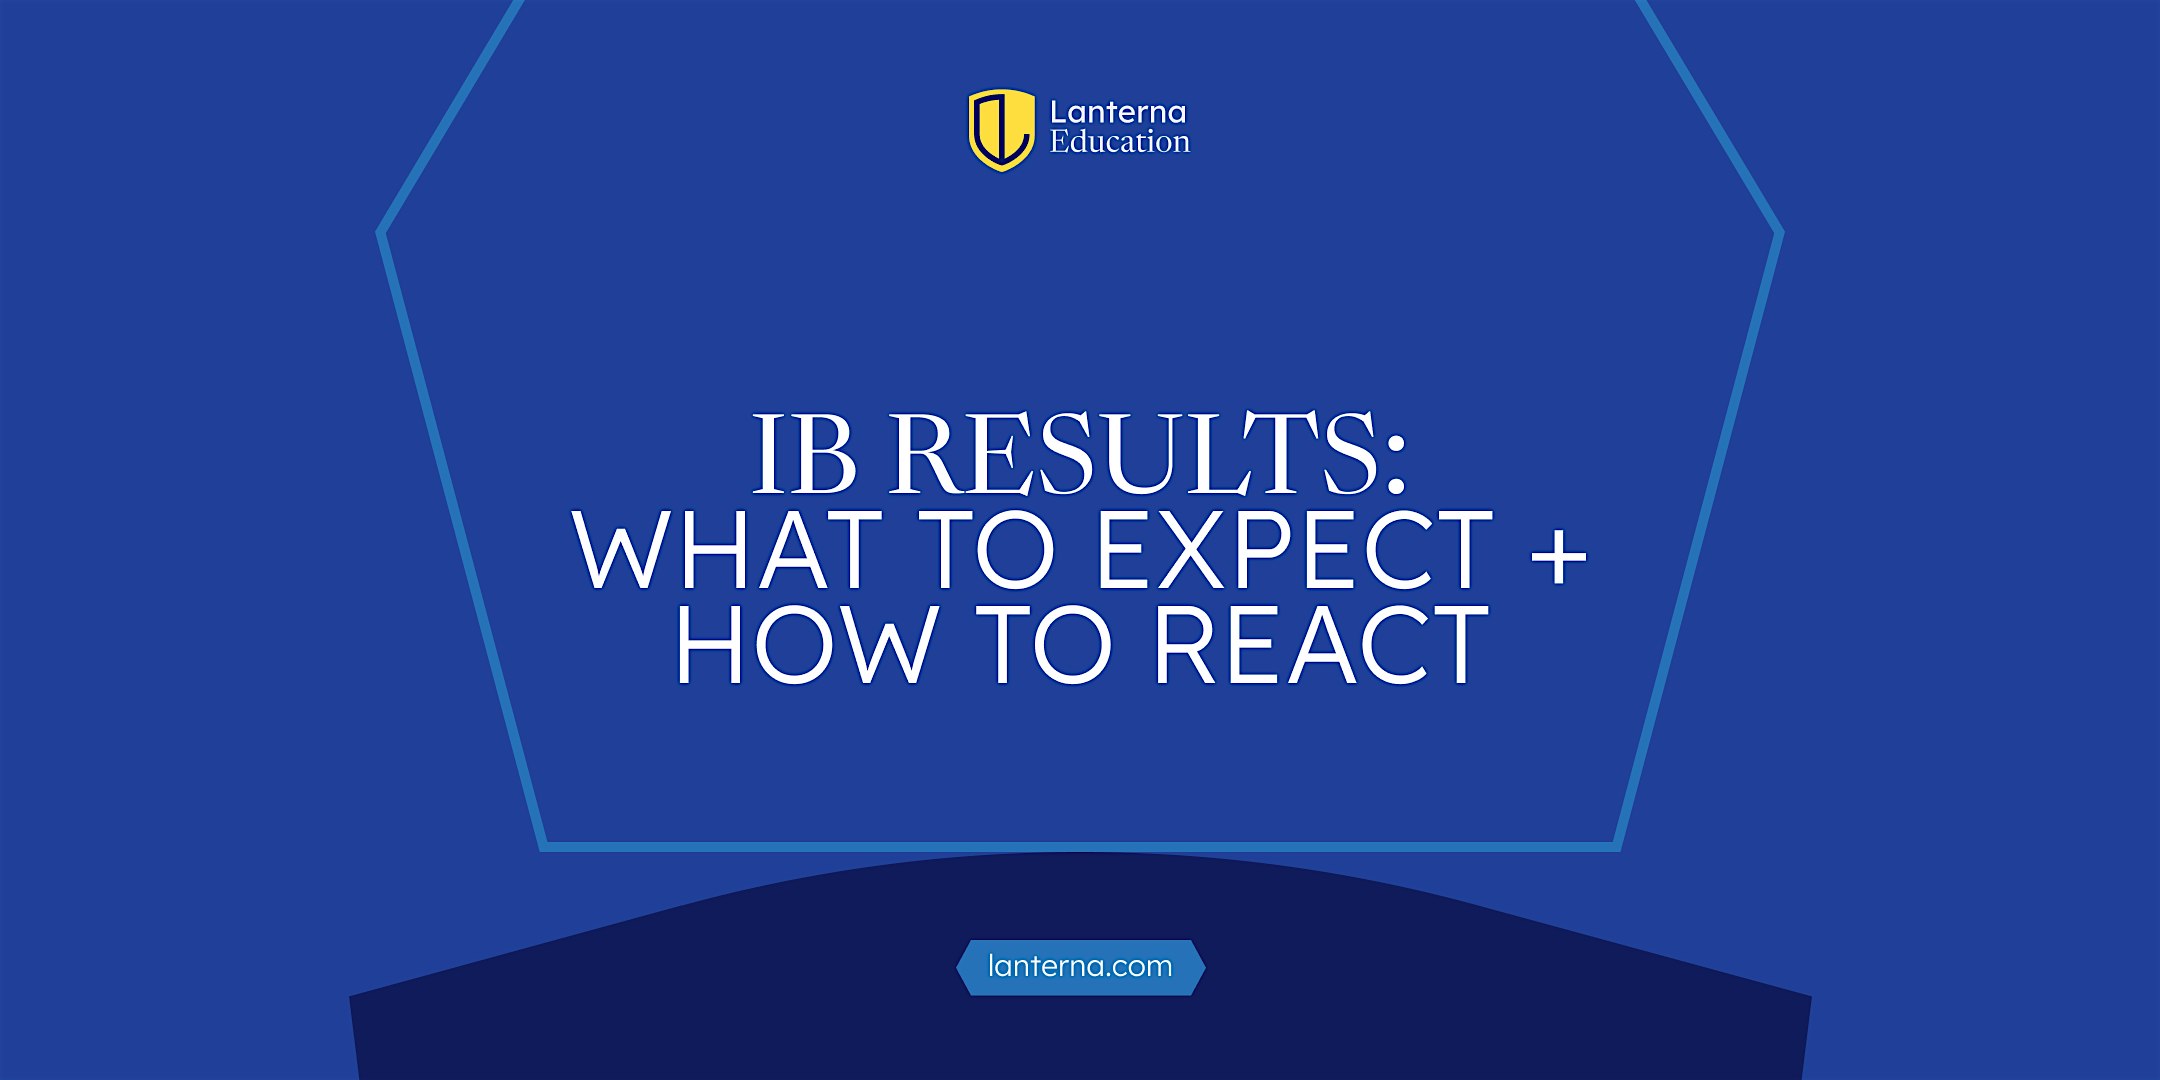 Your IB Results: What to Expect and How to React